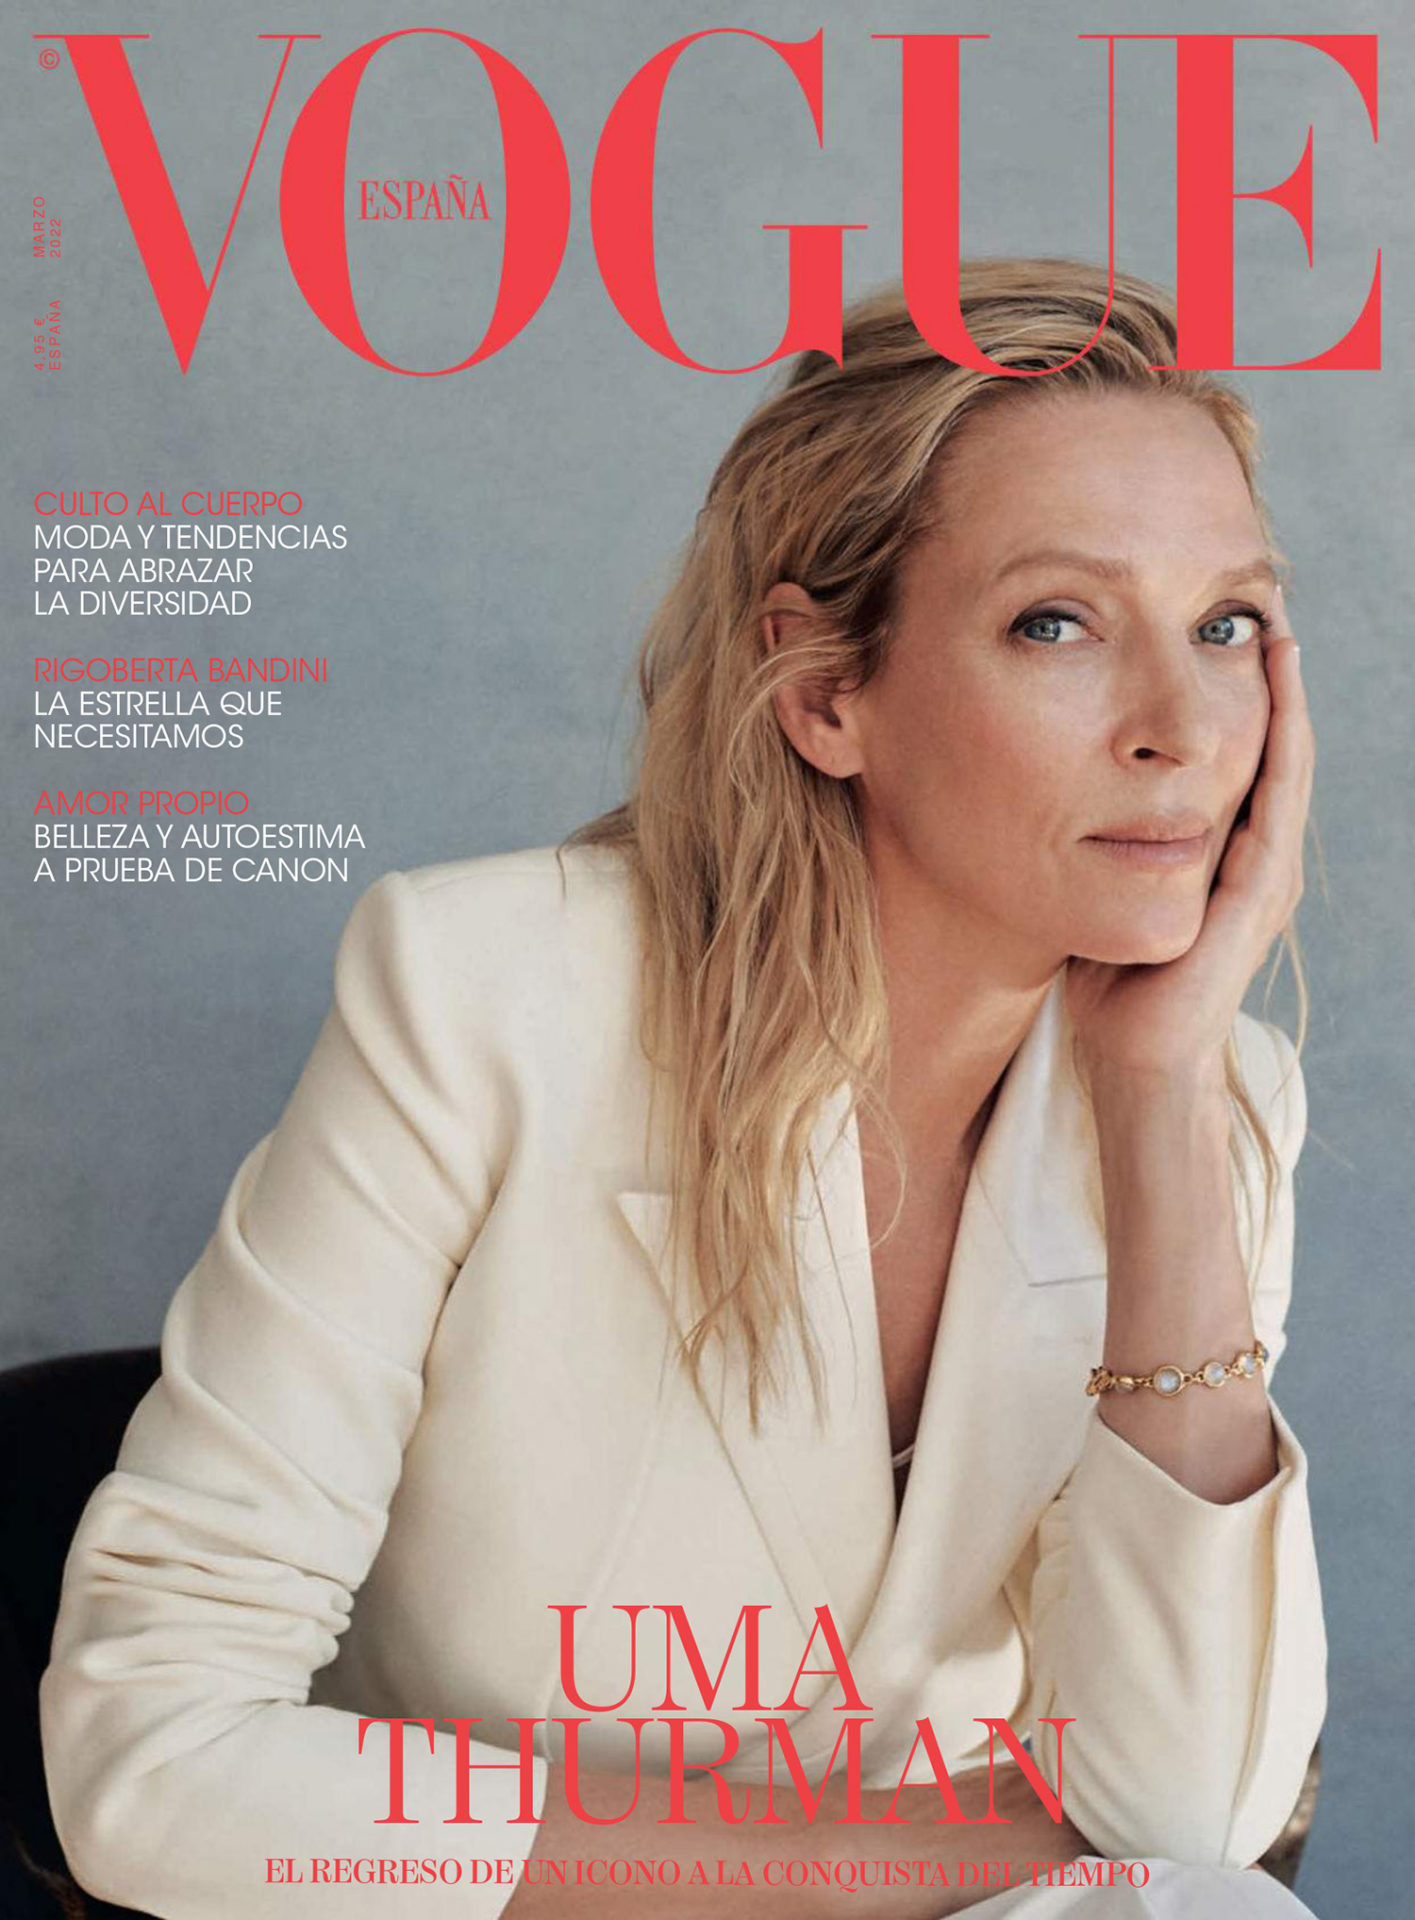 Uma Thurman covers Vogue Spain March 2022 by Tess Ayano